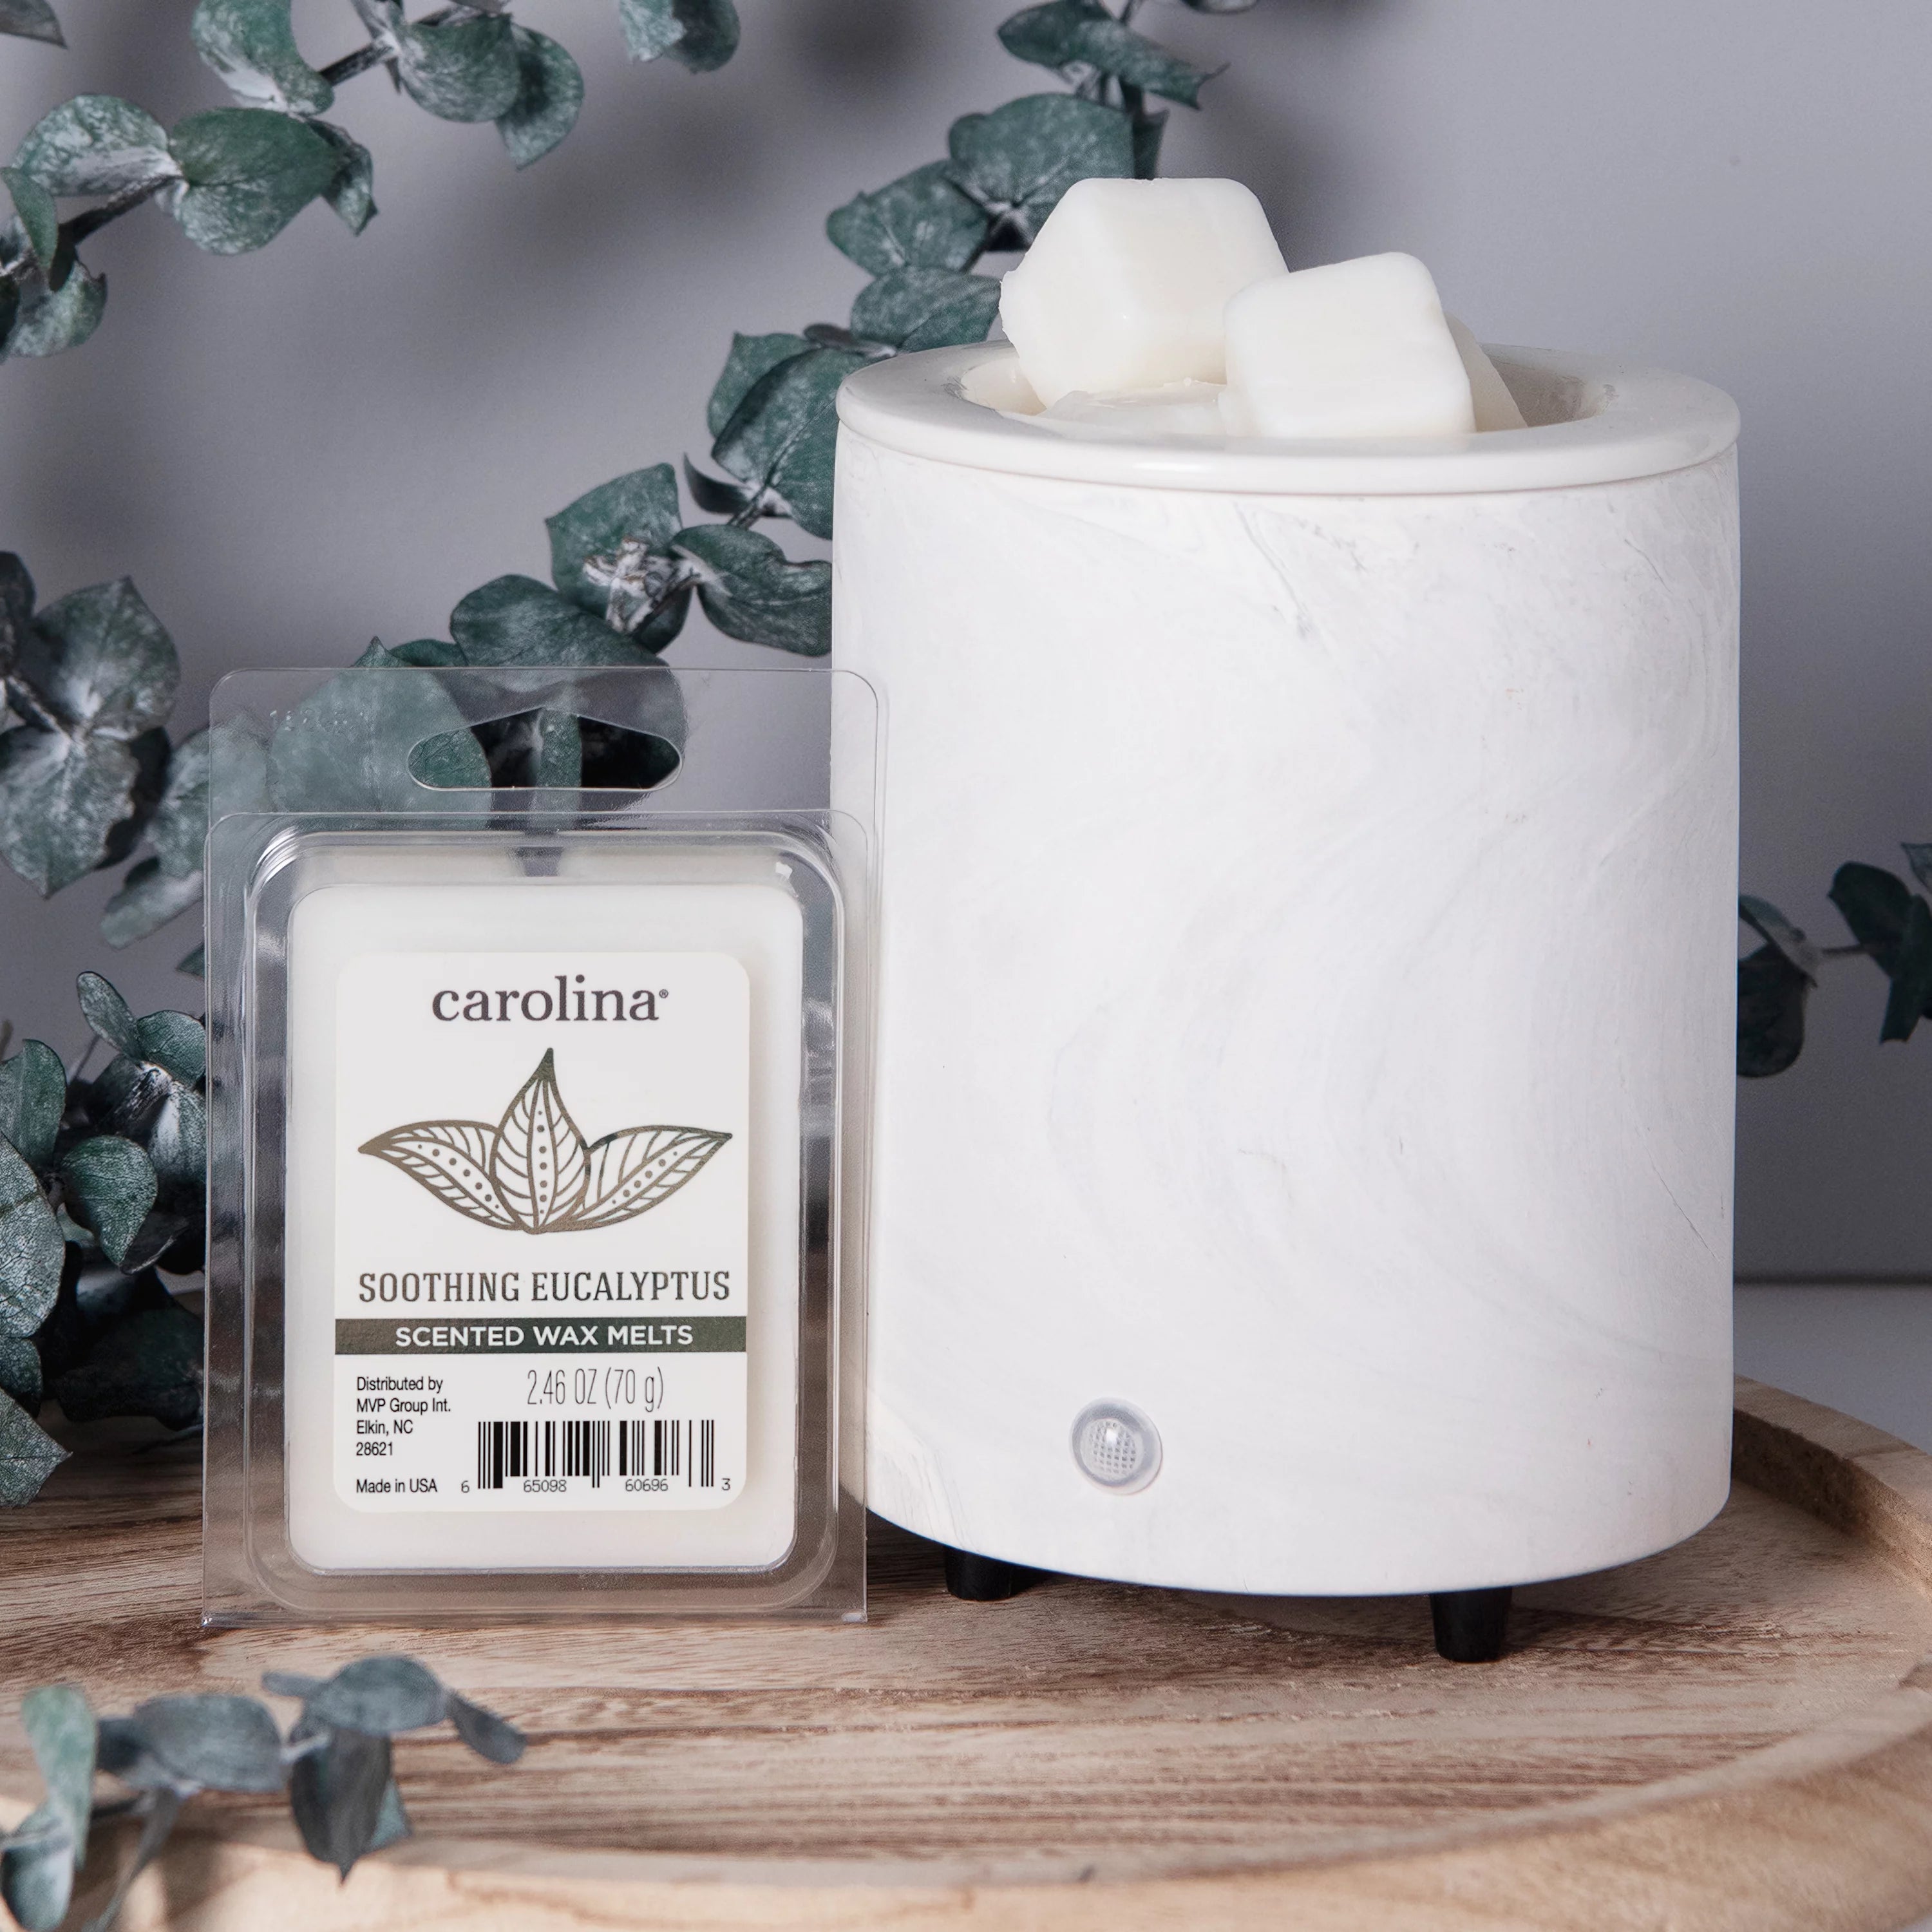 WELLNESS MELT, SOOTHING EUCALYPTUS, 2.46oz – Colonial Candle